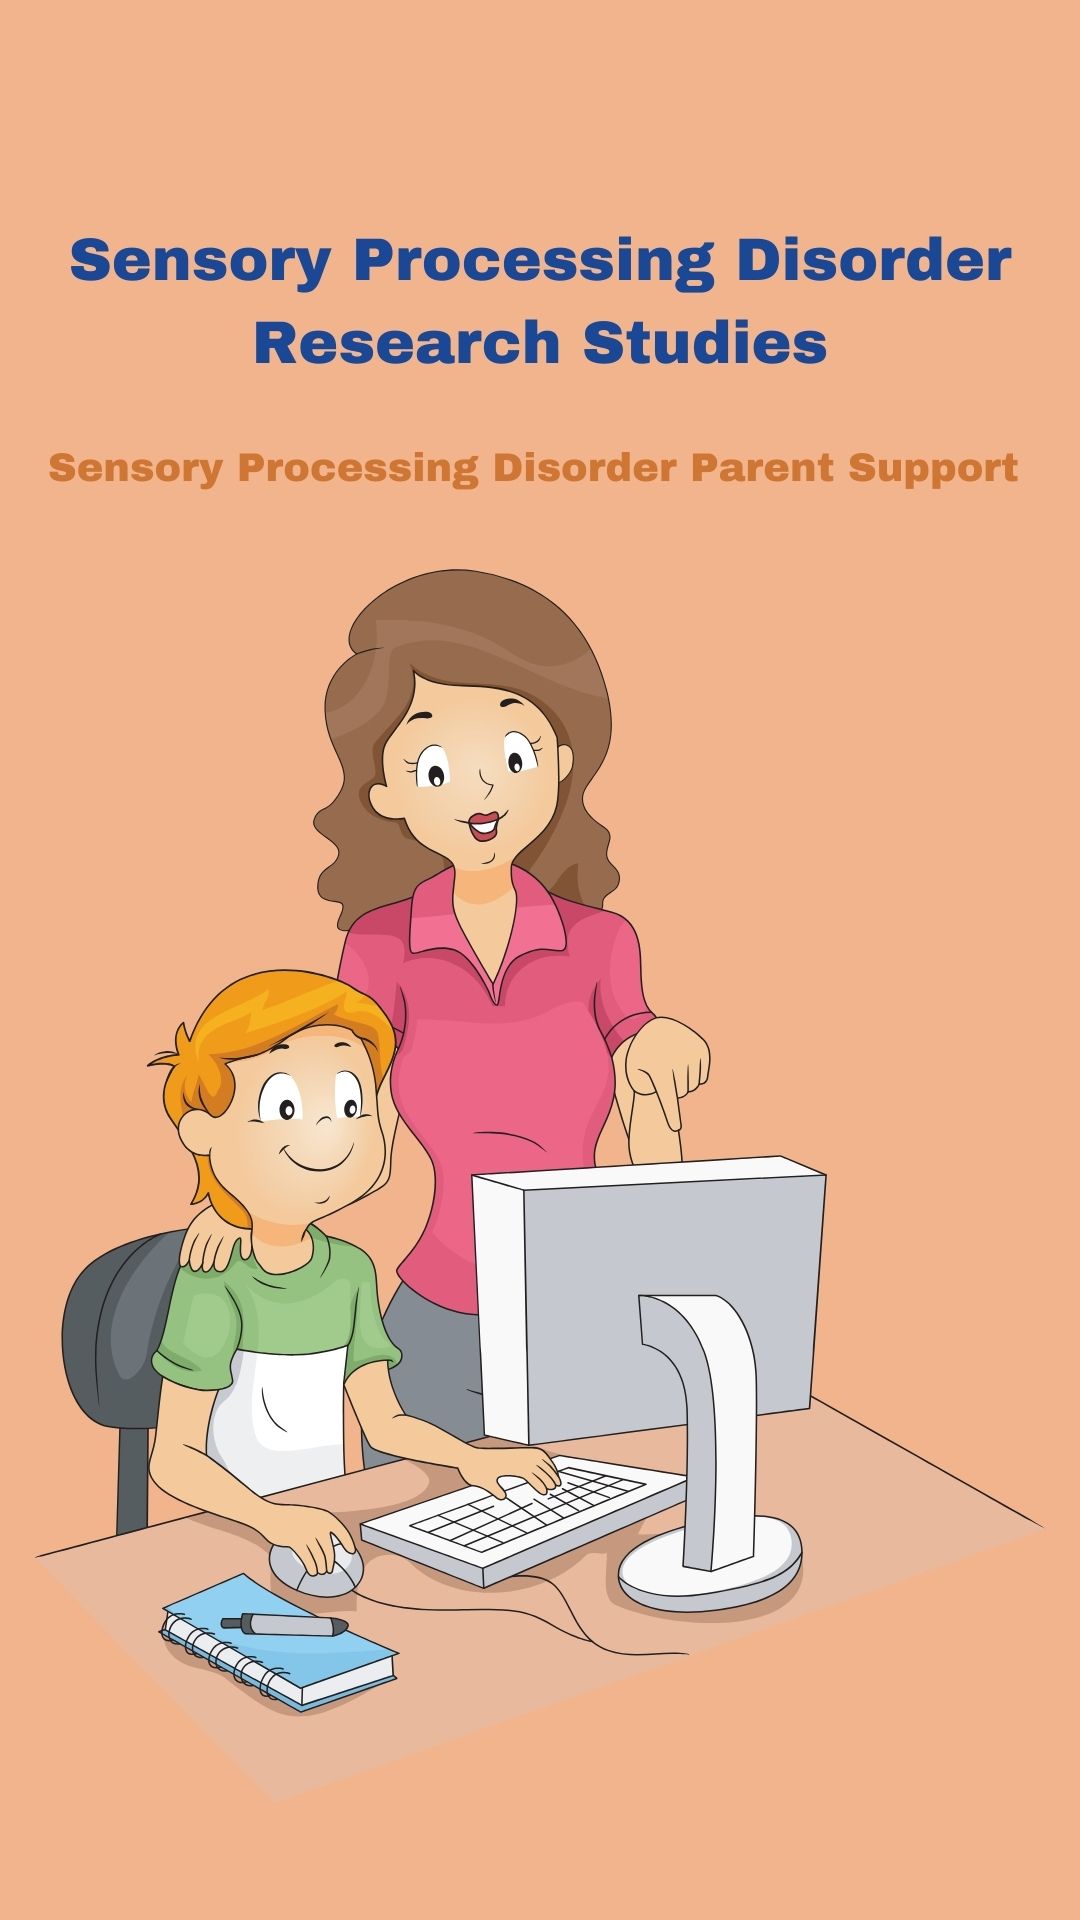 mom with son looking at computer sensory processing disorder research studies 